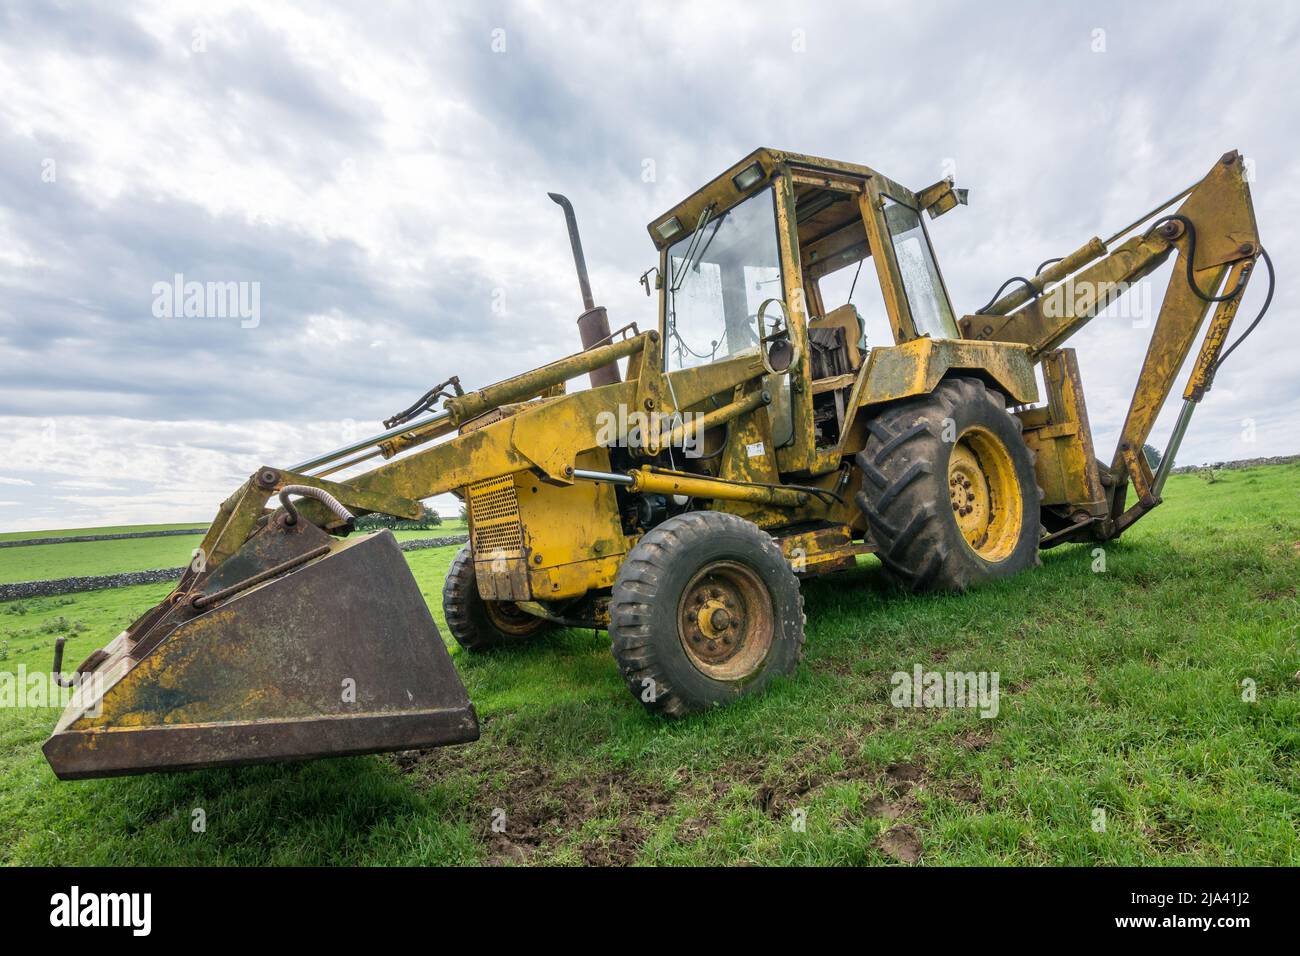 An old Ford backhoe loader rests in the sunshine of a field near Appleby, Yorkshire. Spotted while doing the Dales High Way walk. Stock Photo